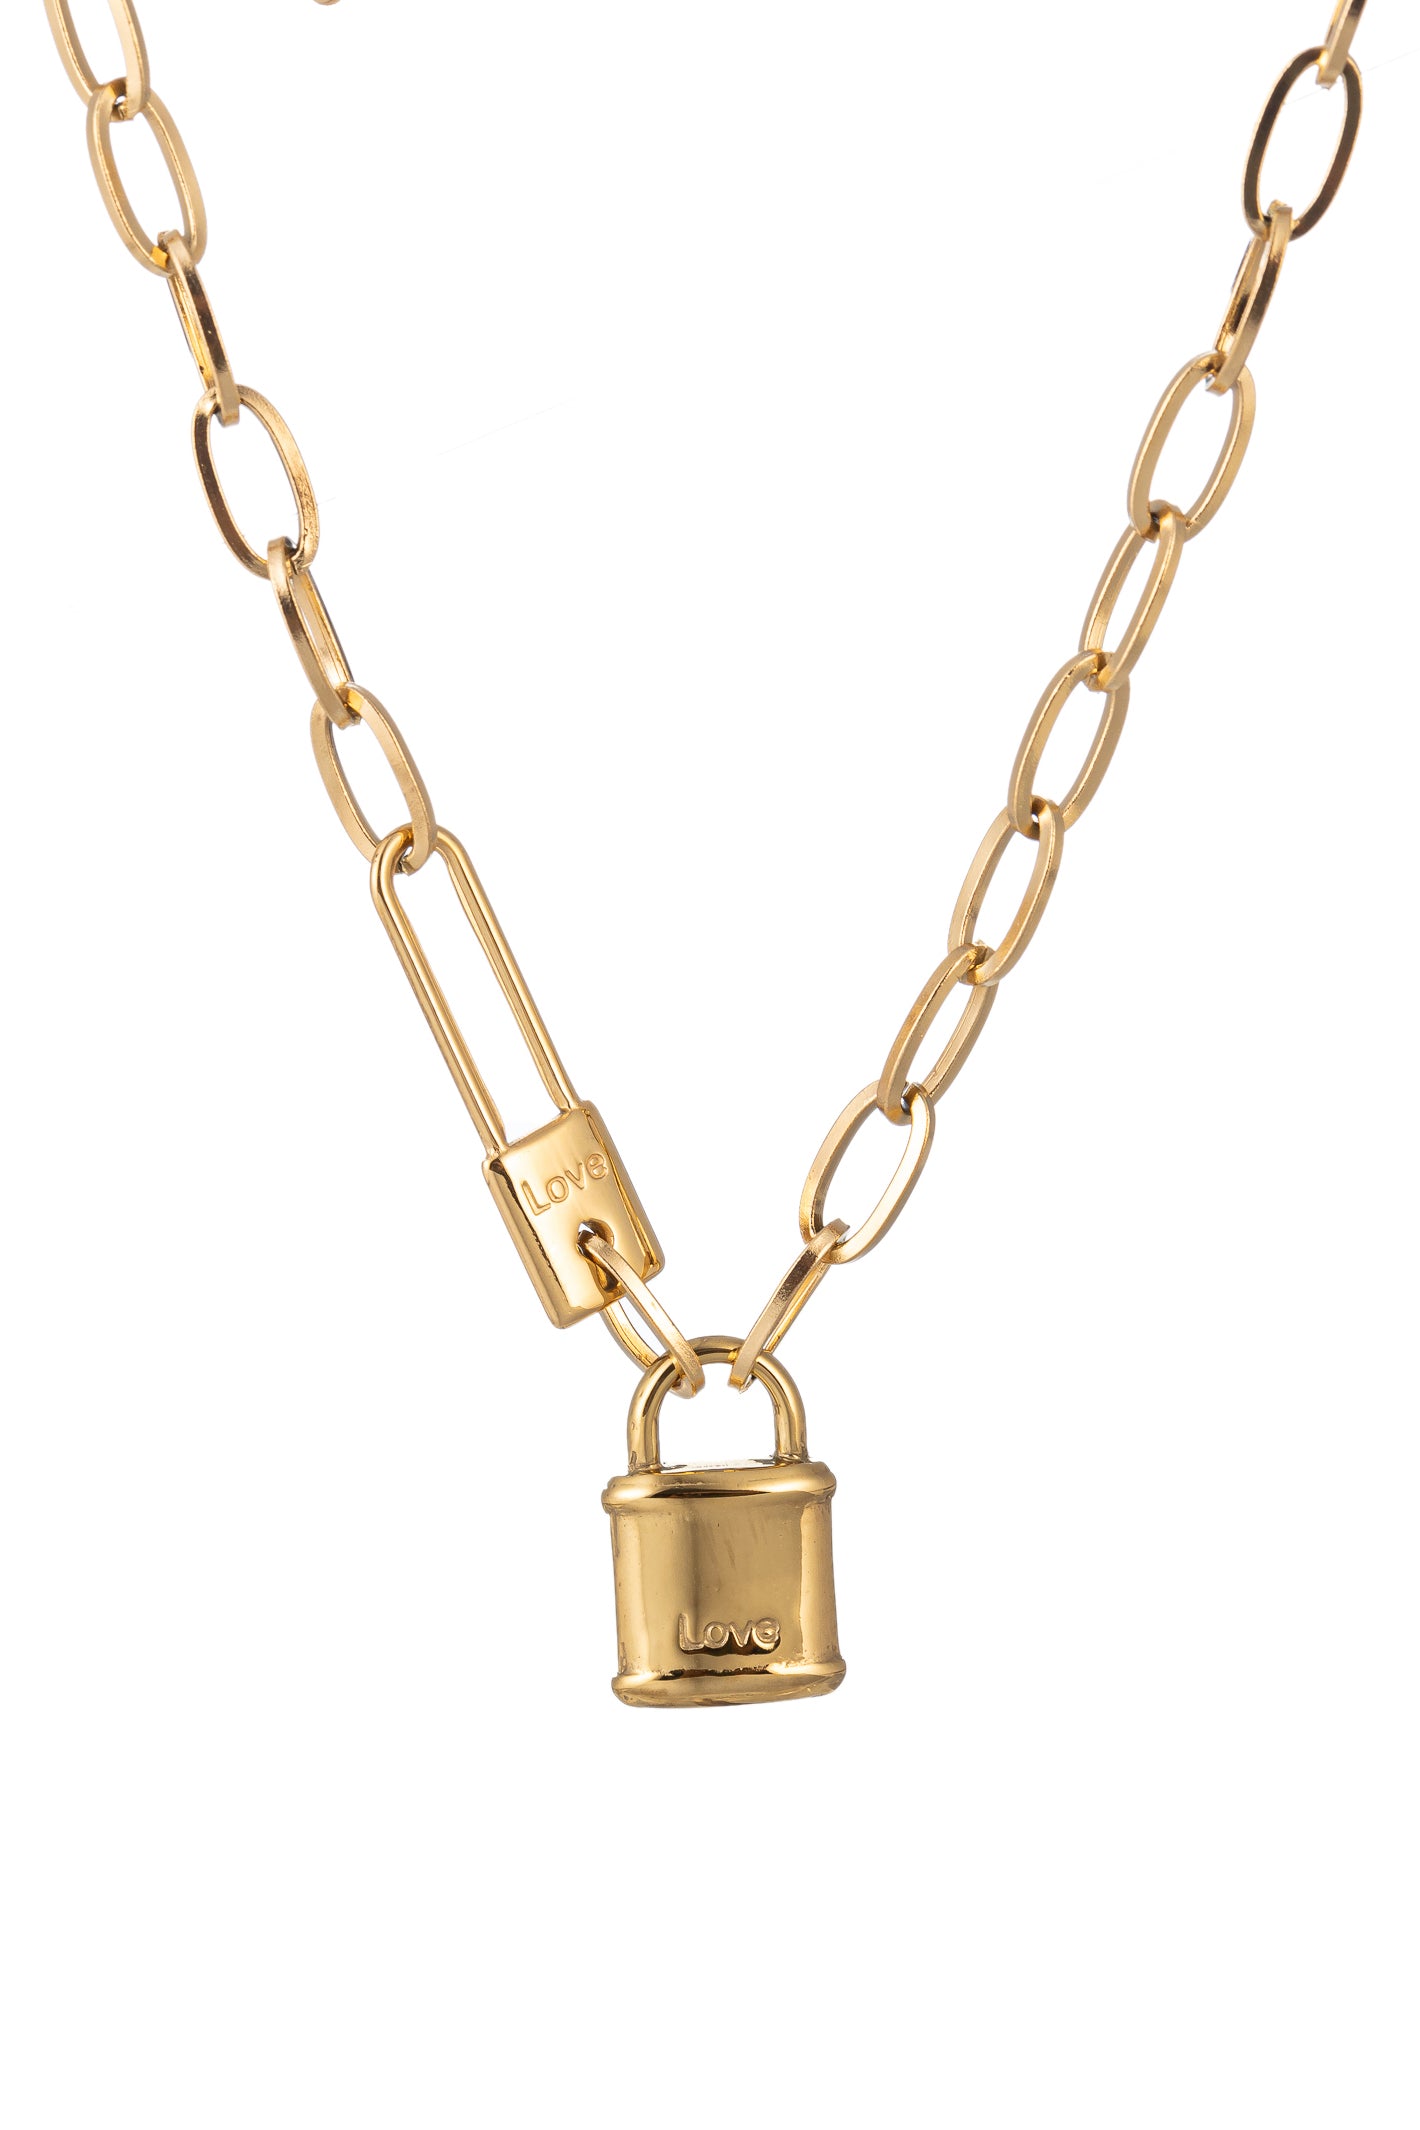 Lock Pendant Stainless Steel Gold Plated Color Charm Pendants, Several Styles and Sizes to Choose from , Pick Choice 1-4 Fast Ship